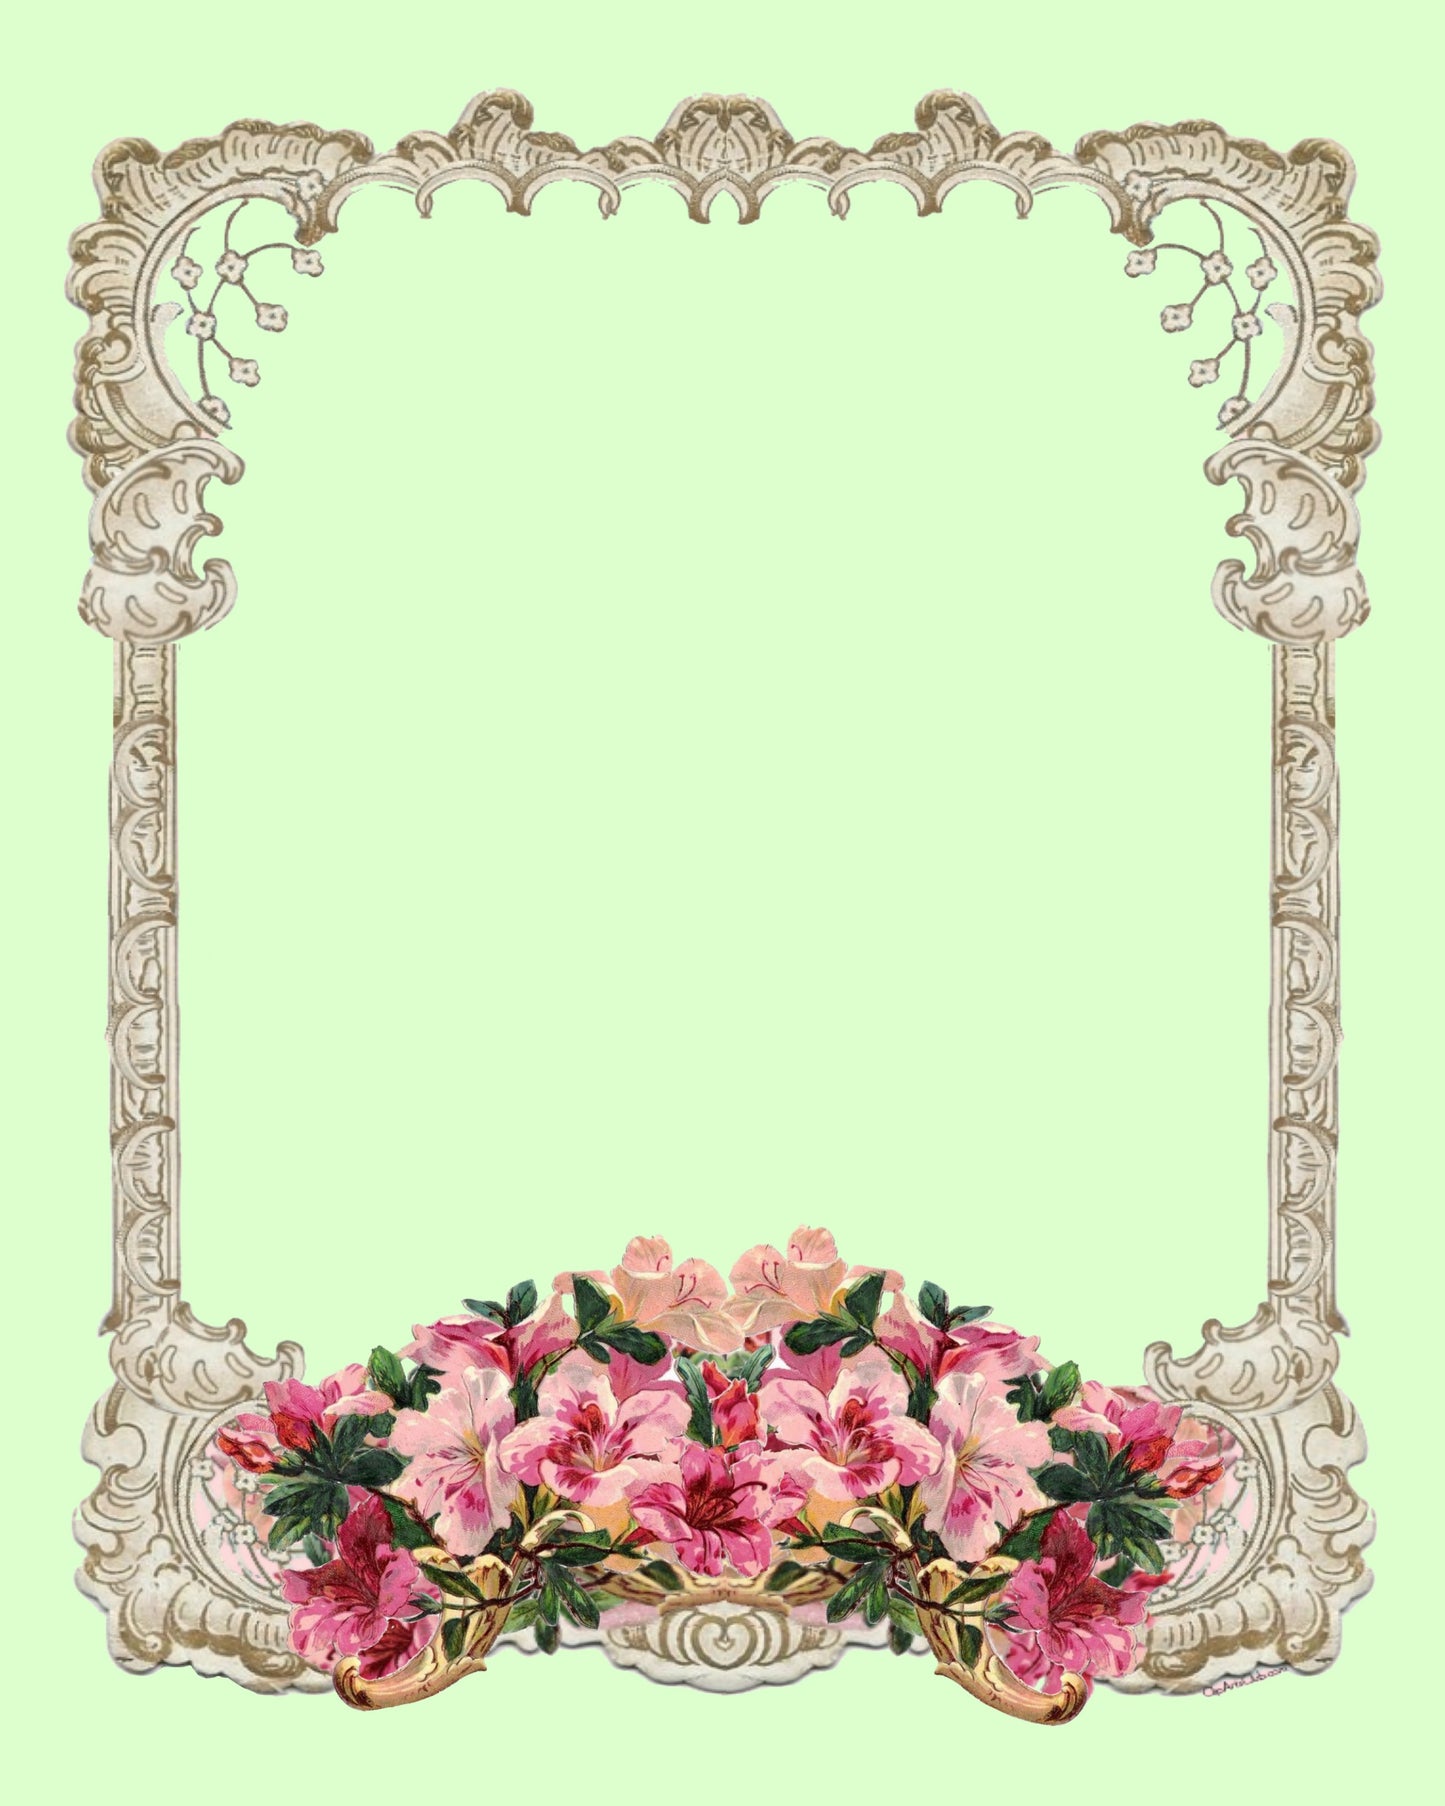 Green Antique Lace & Azaleas Beautiful 8x10, Frame, Stationery or Scrapbook Printable Page